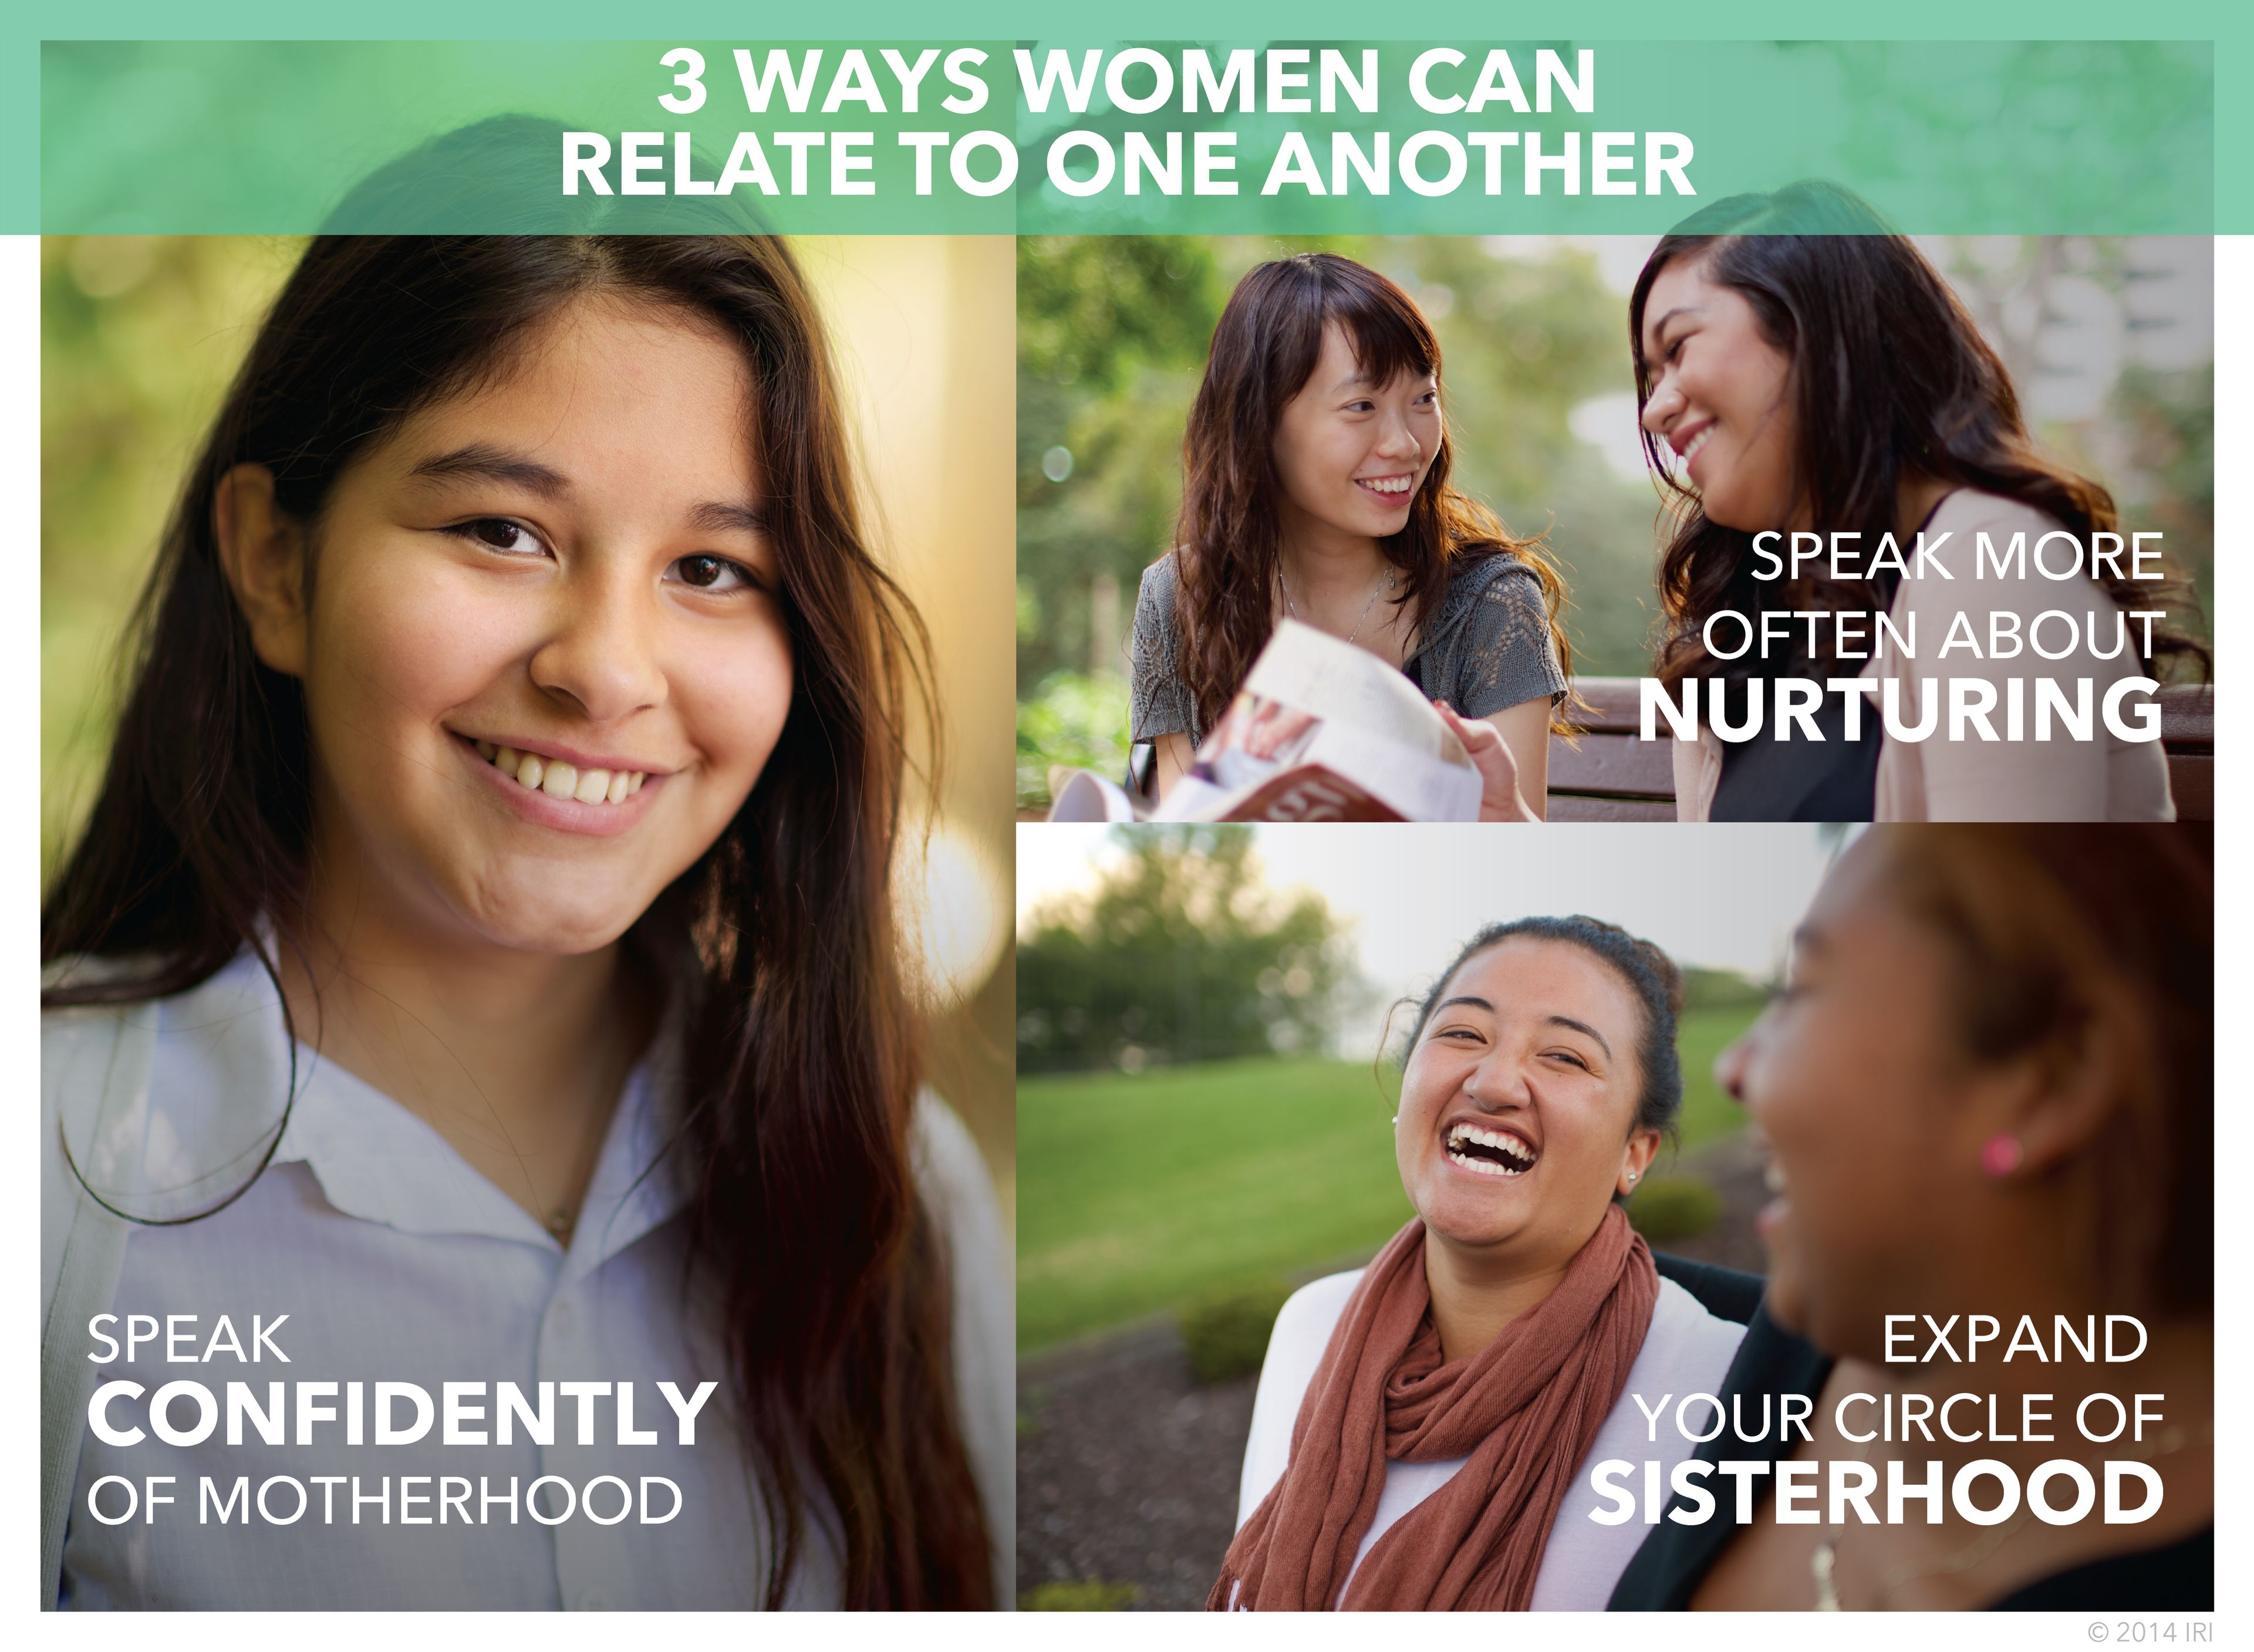 3 ways women can relate to one another: “Speak confidently of motherhood. Speak more often about nurturing. Expand your circle of sisterhood.”—Rosemary Thackeray, “Celebrate Nurturing” © undefined ipCode 1.